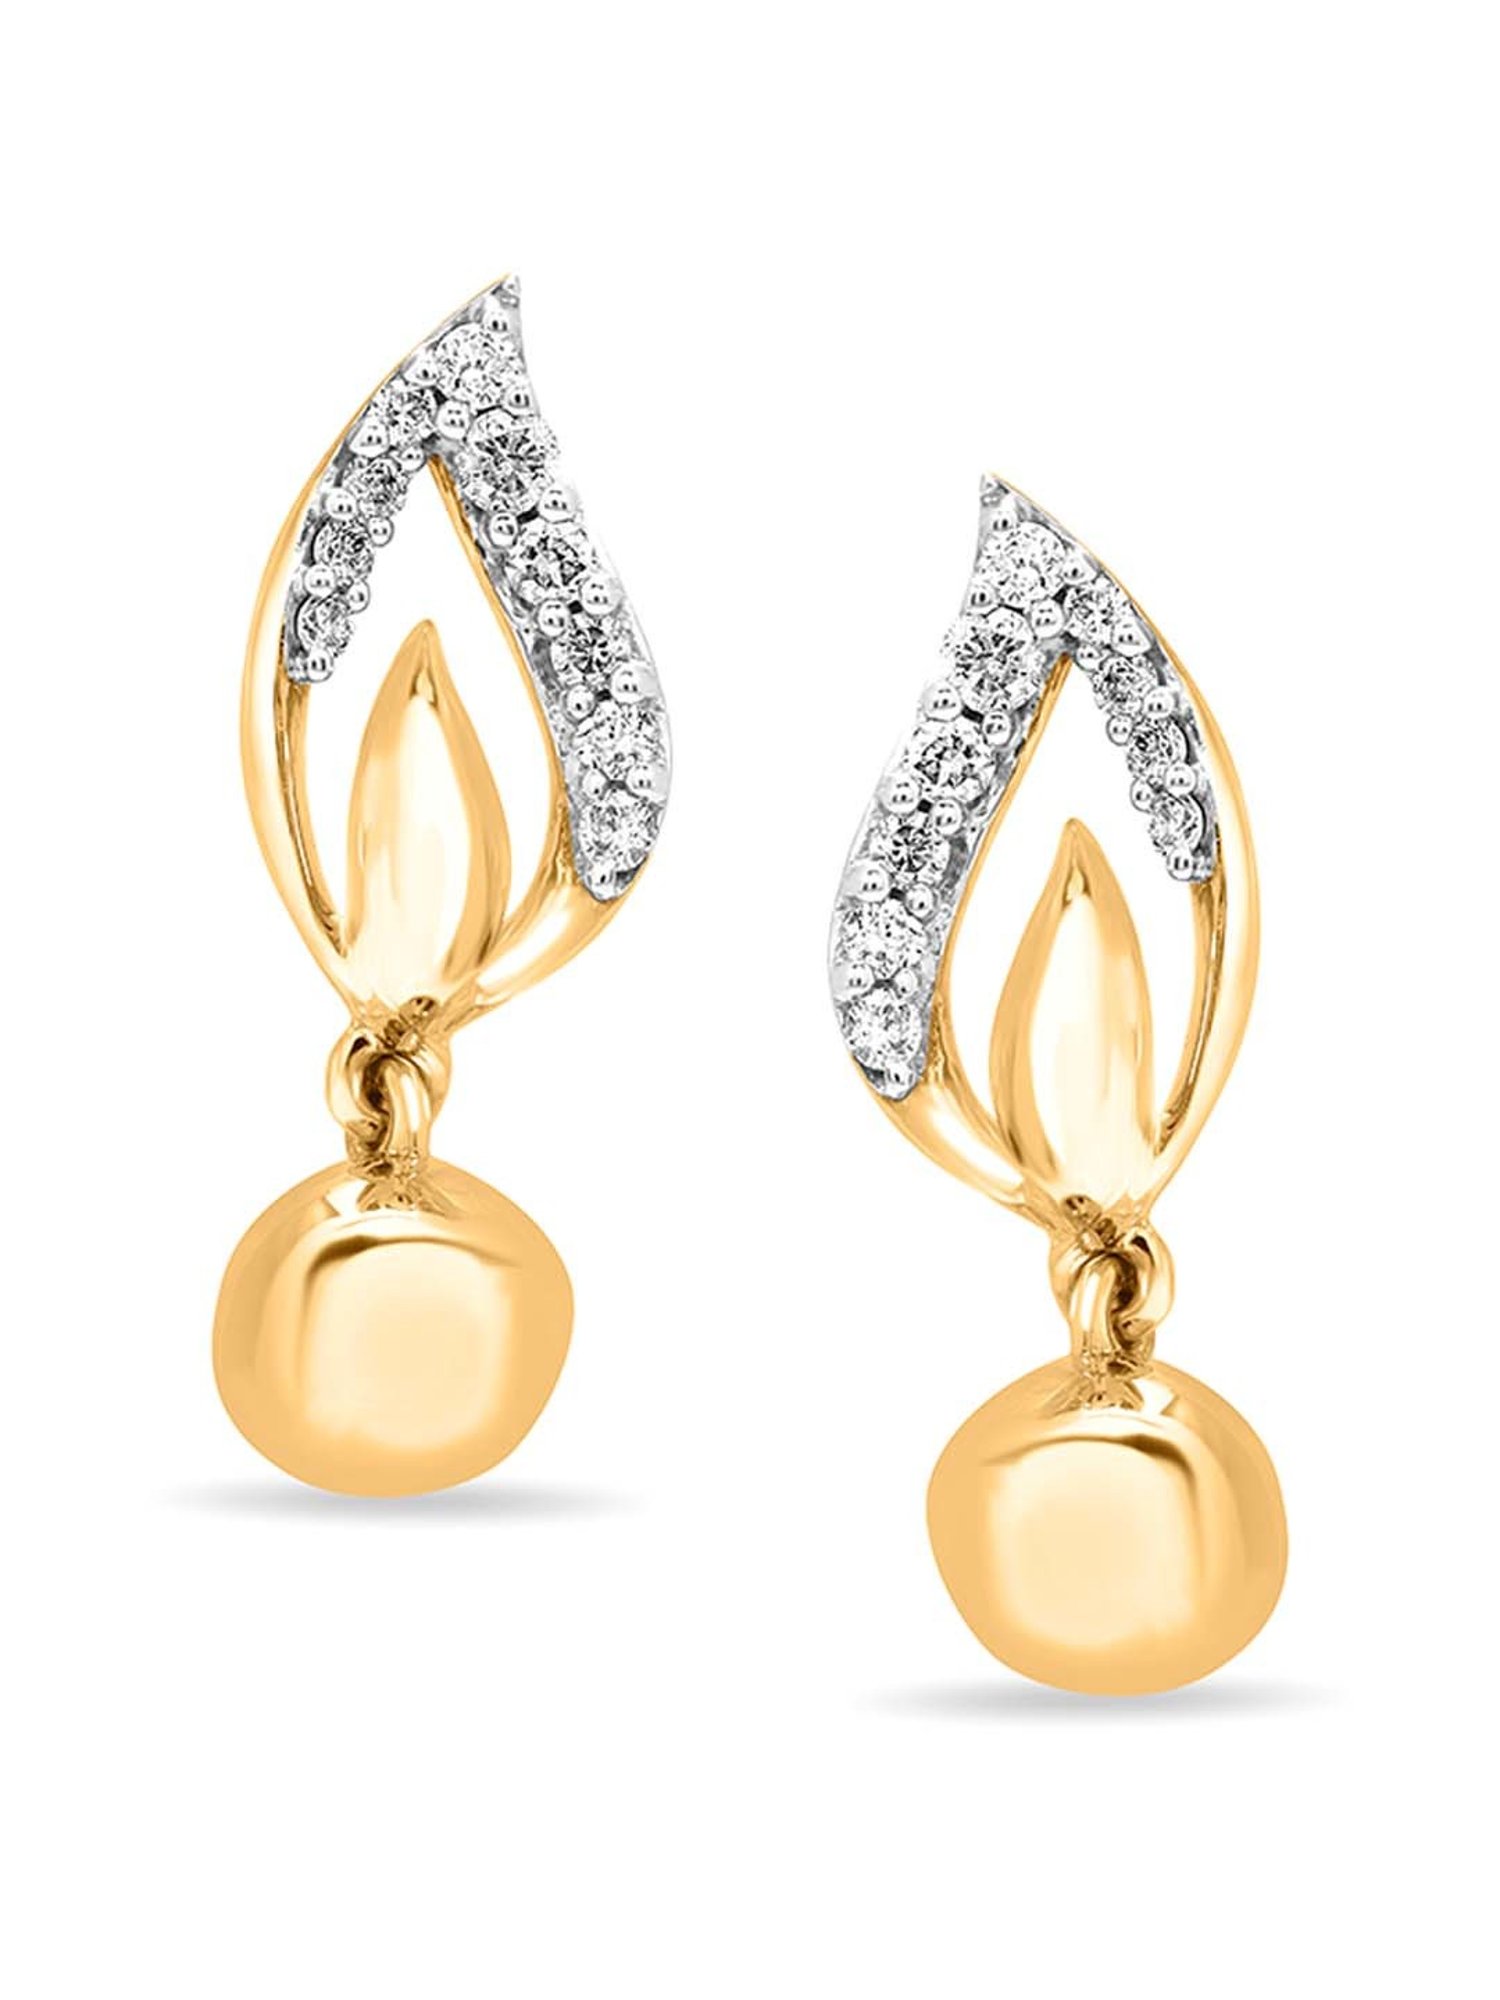 Ever Blossom Earrings, Yellow Gold, Onyx & Diamonds - Categories